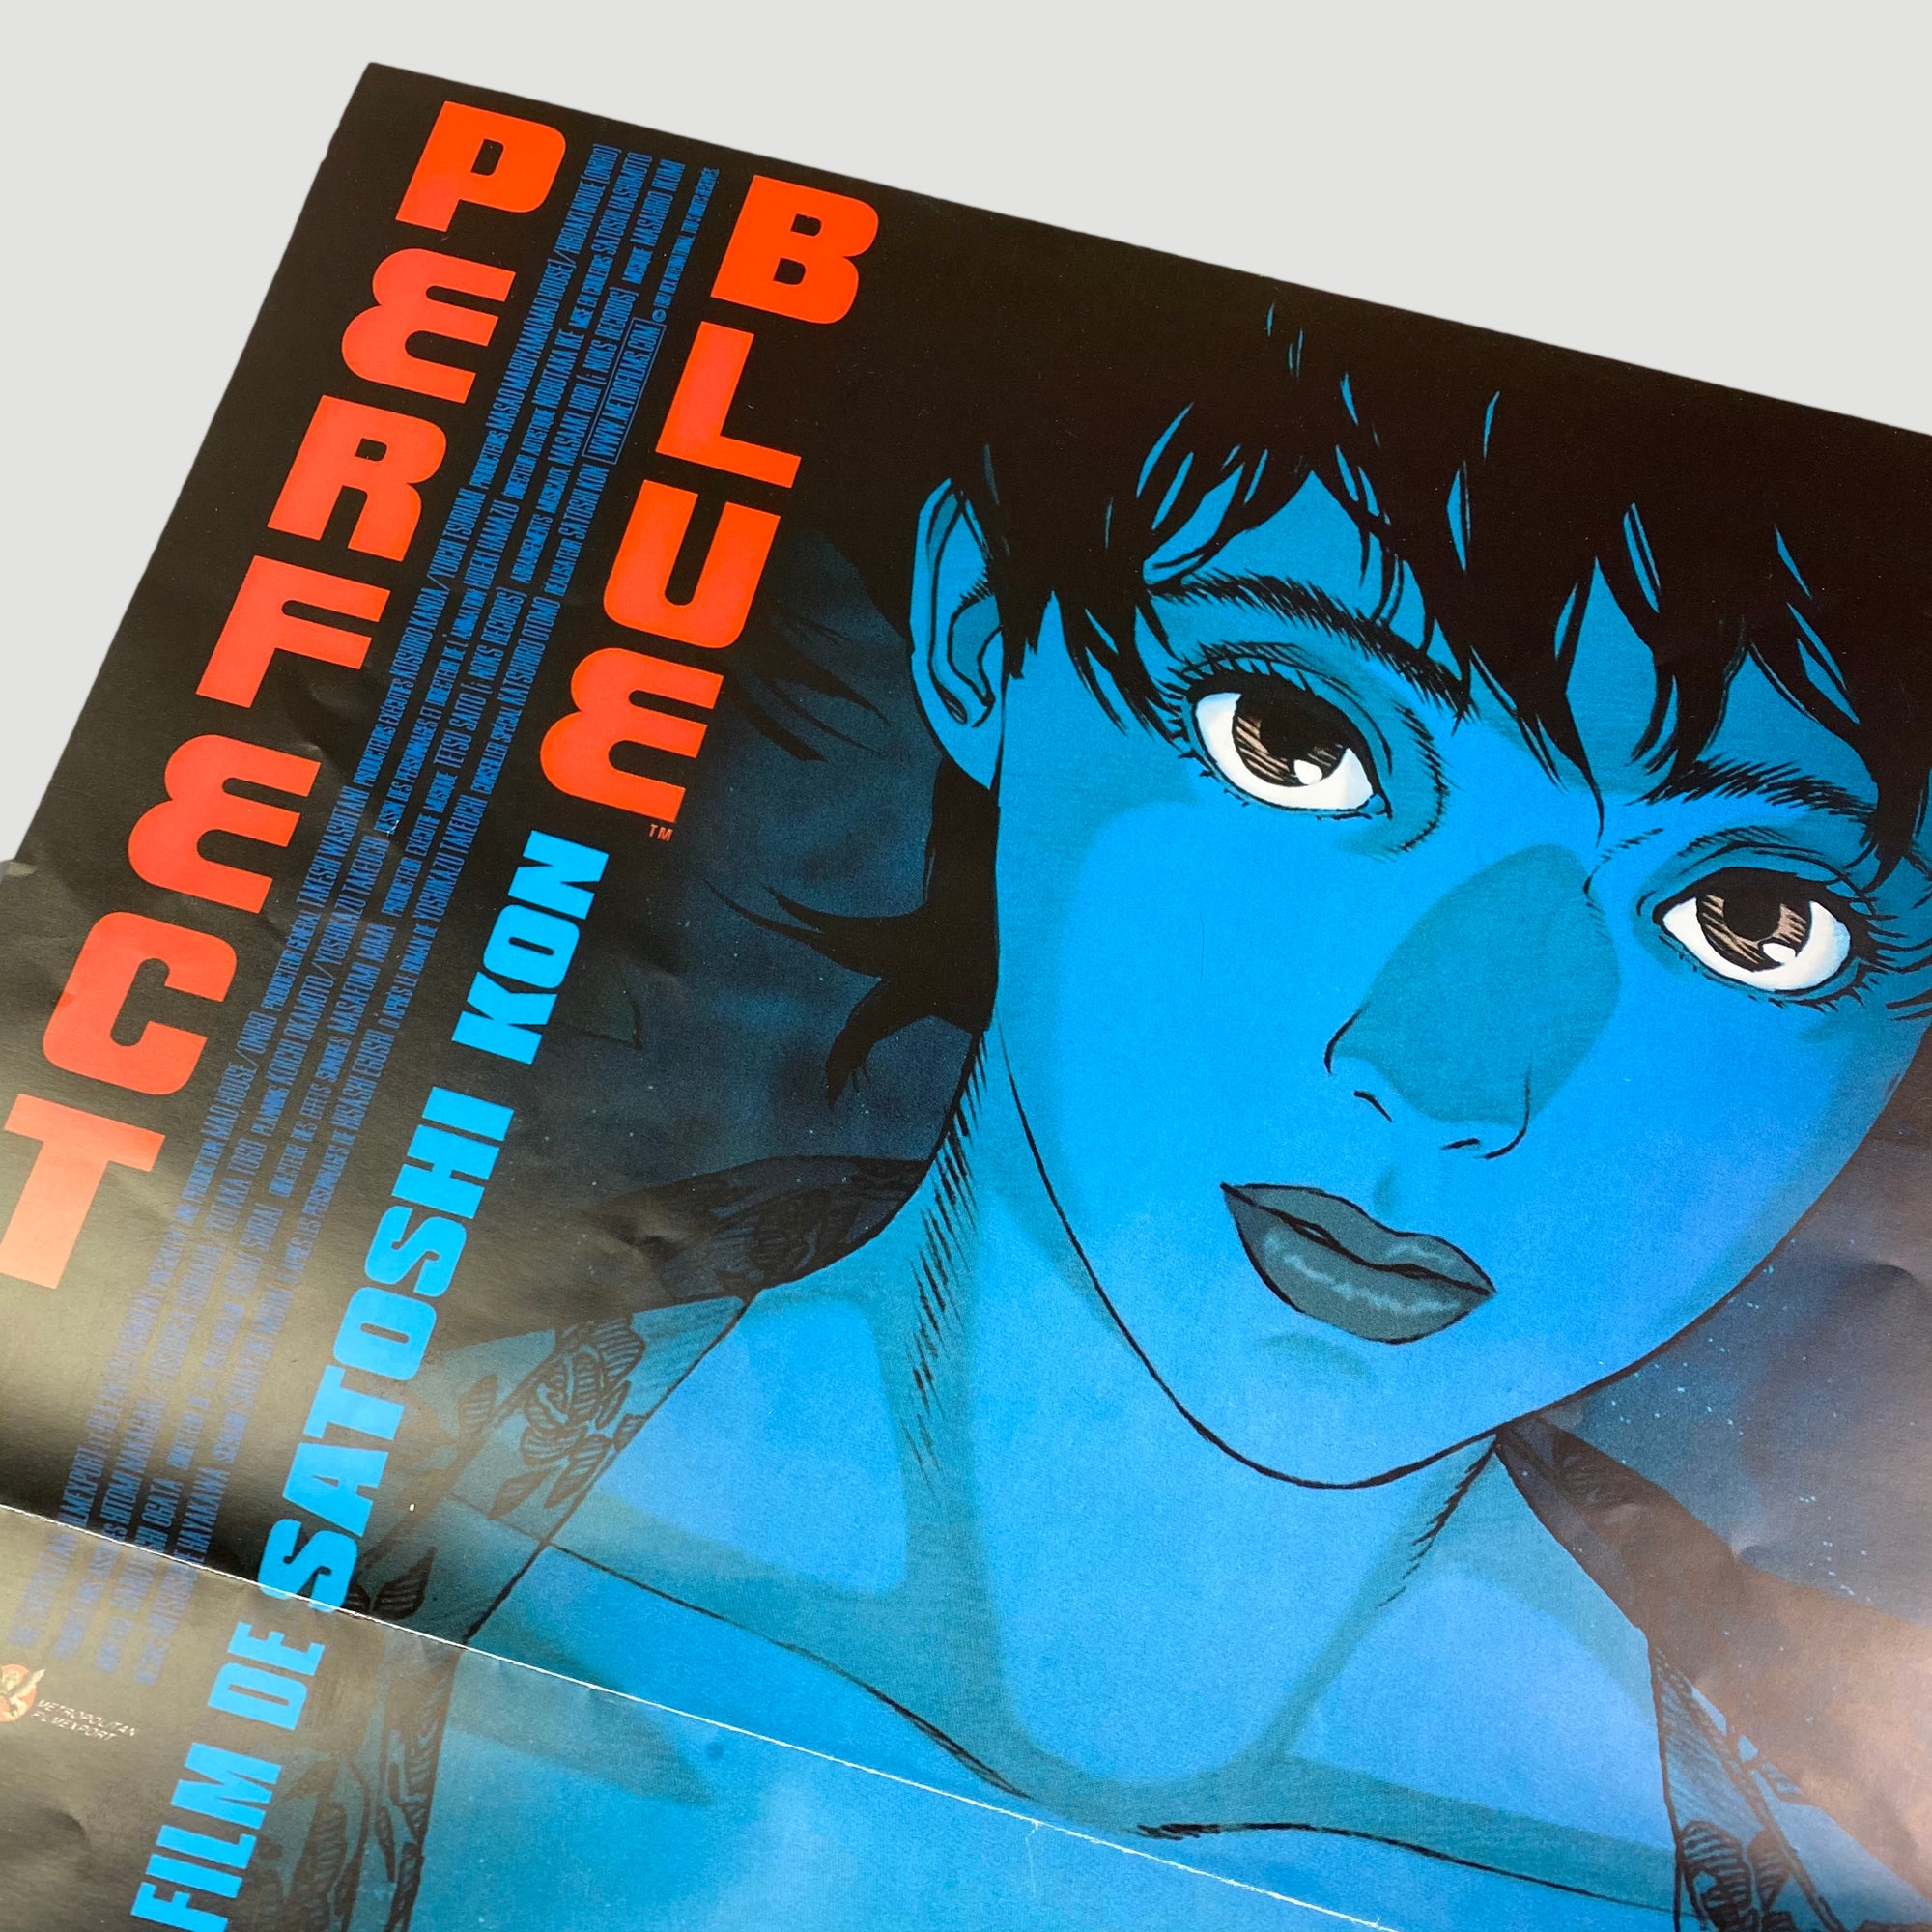 Perfect Blue Anime Review & Recommendation | Anime Amino